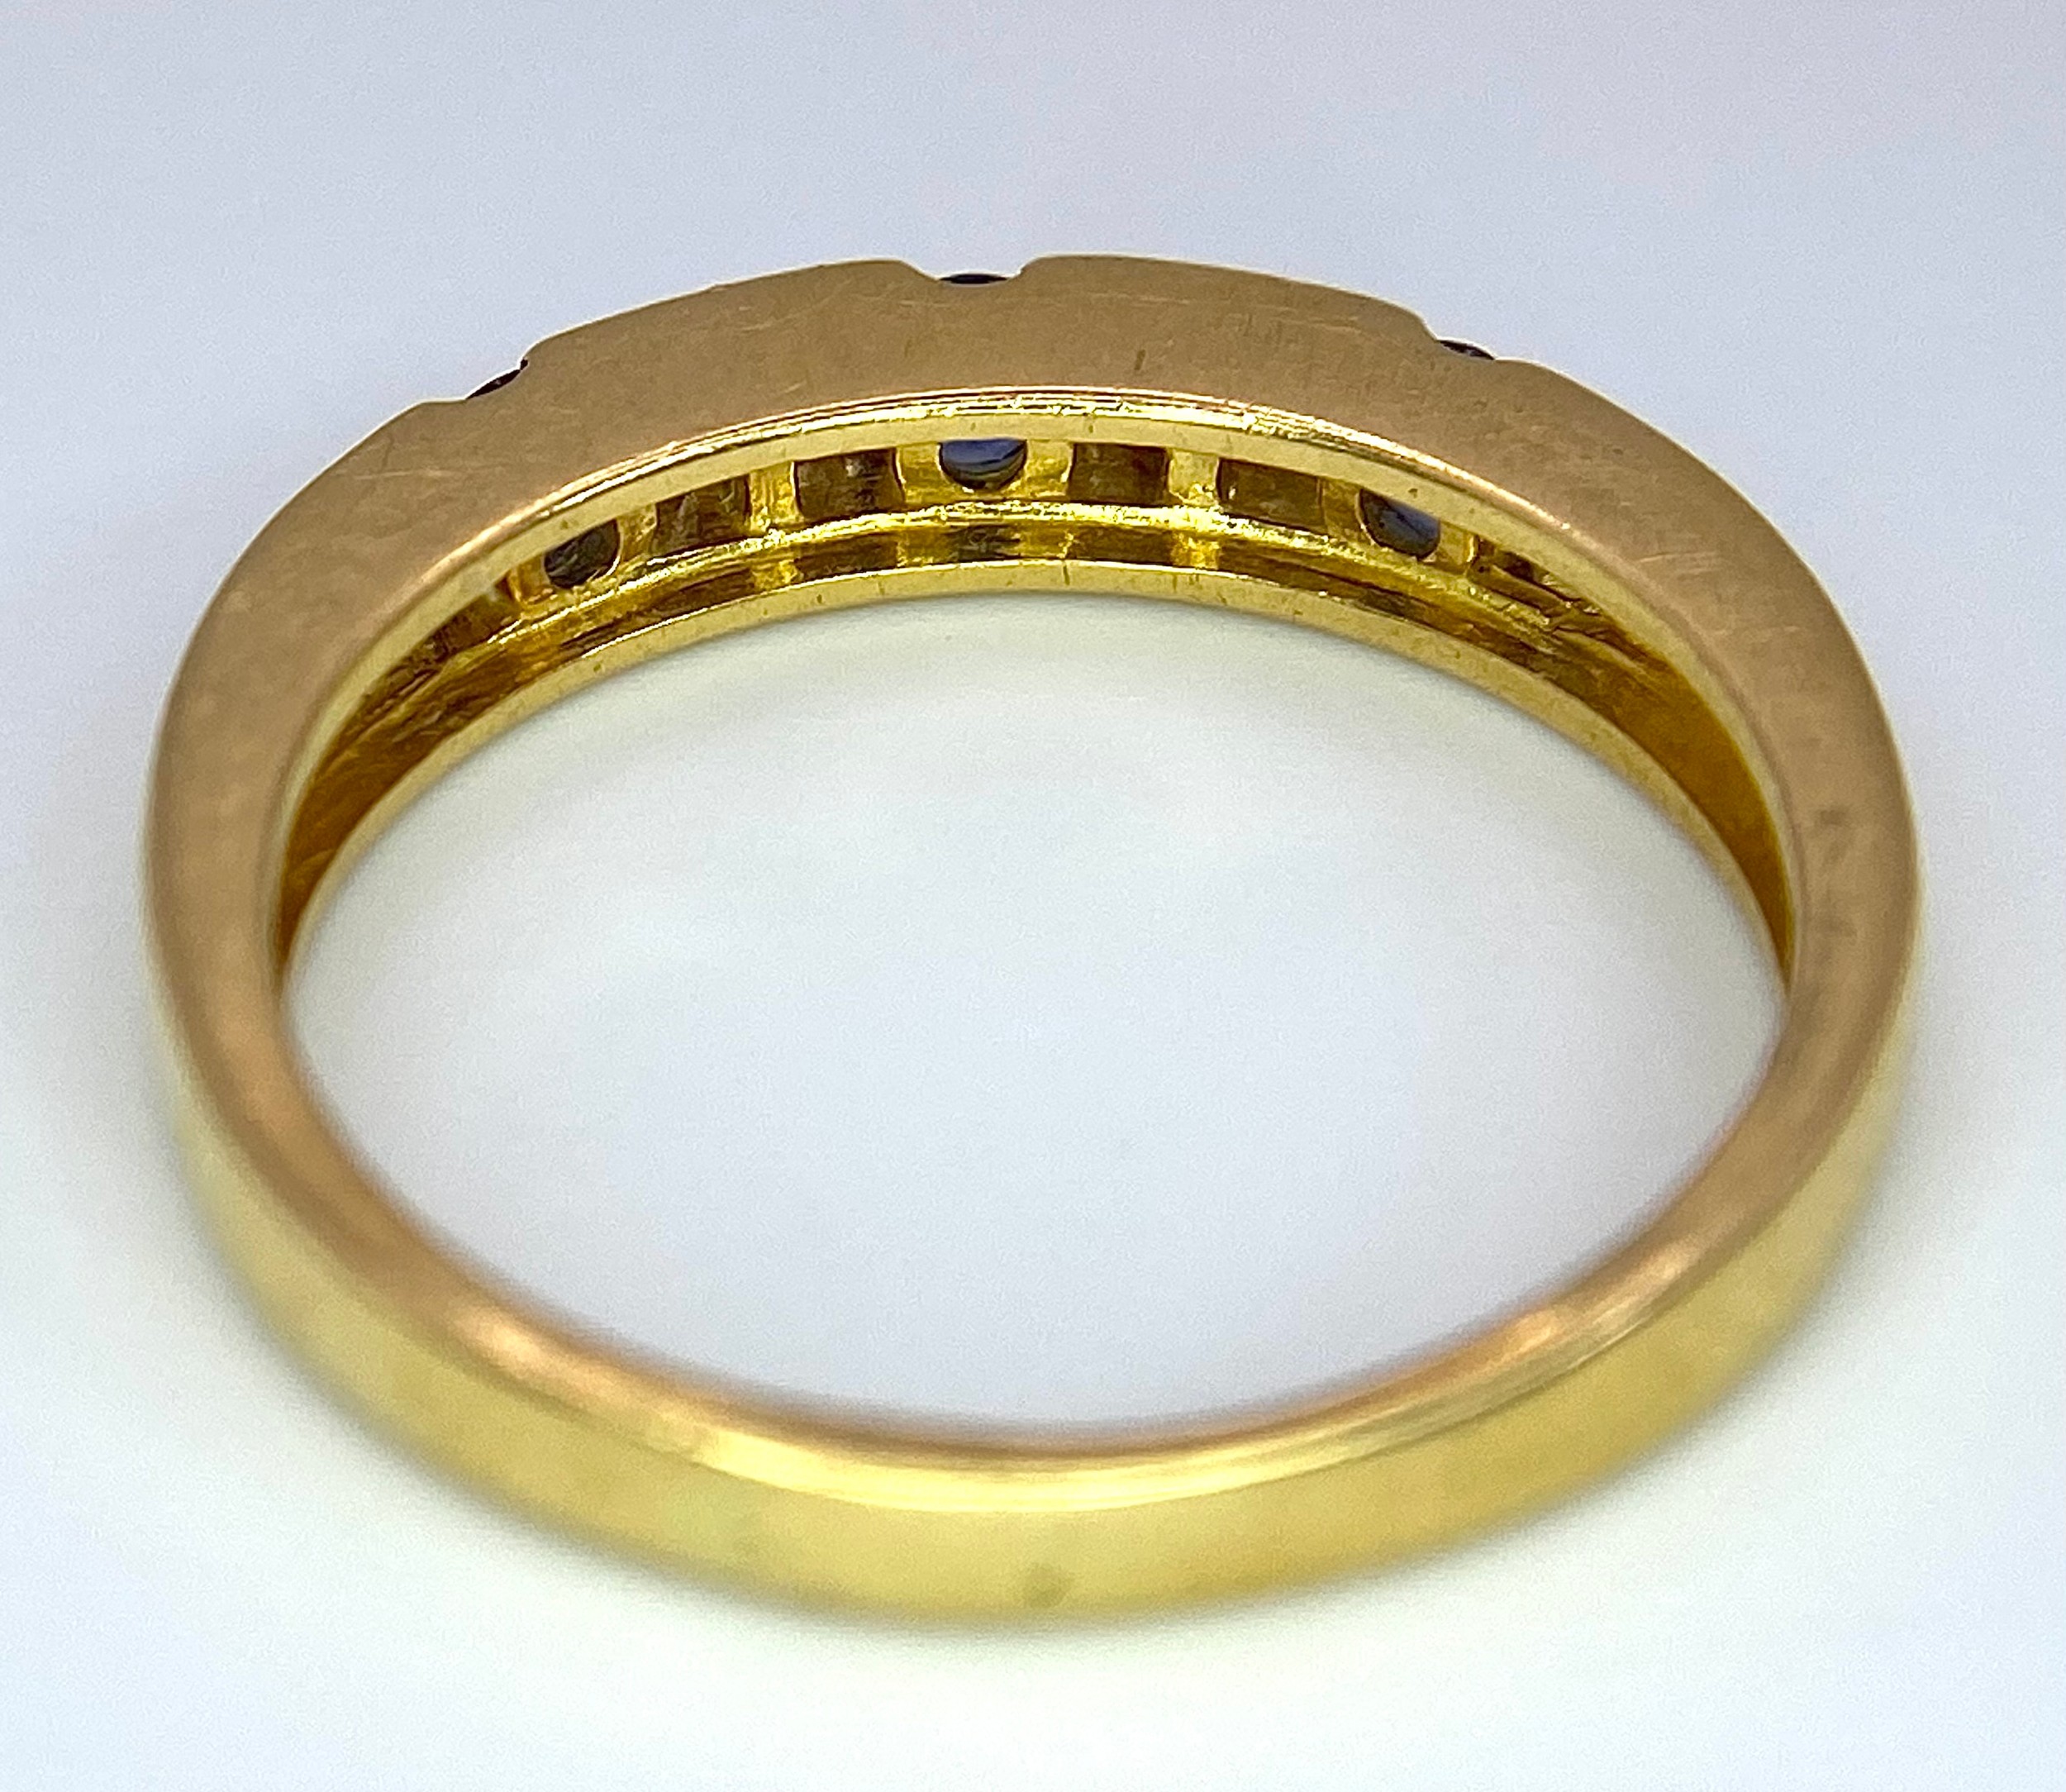 AN 18K YELLOW GOLD DIAMOND & SAPPHIRE BAND RING. 0.20ctw, size O, 3.6g total weight. Ref: SC 9037 - Image 5 of 7